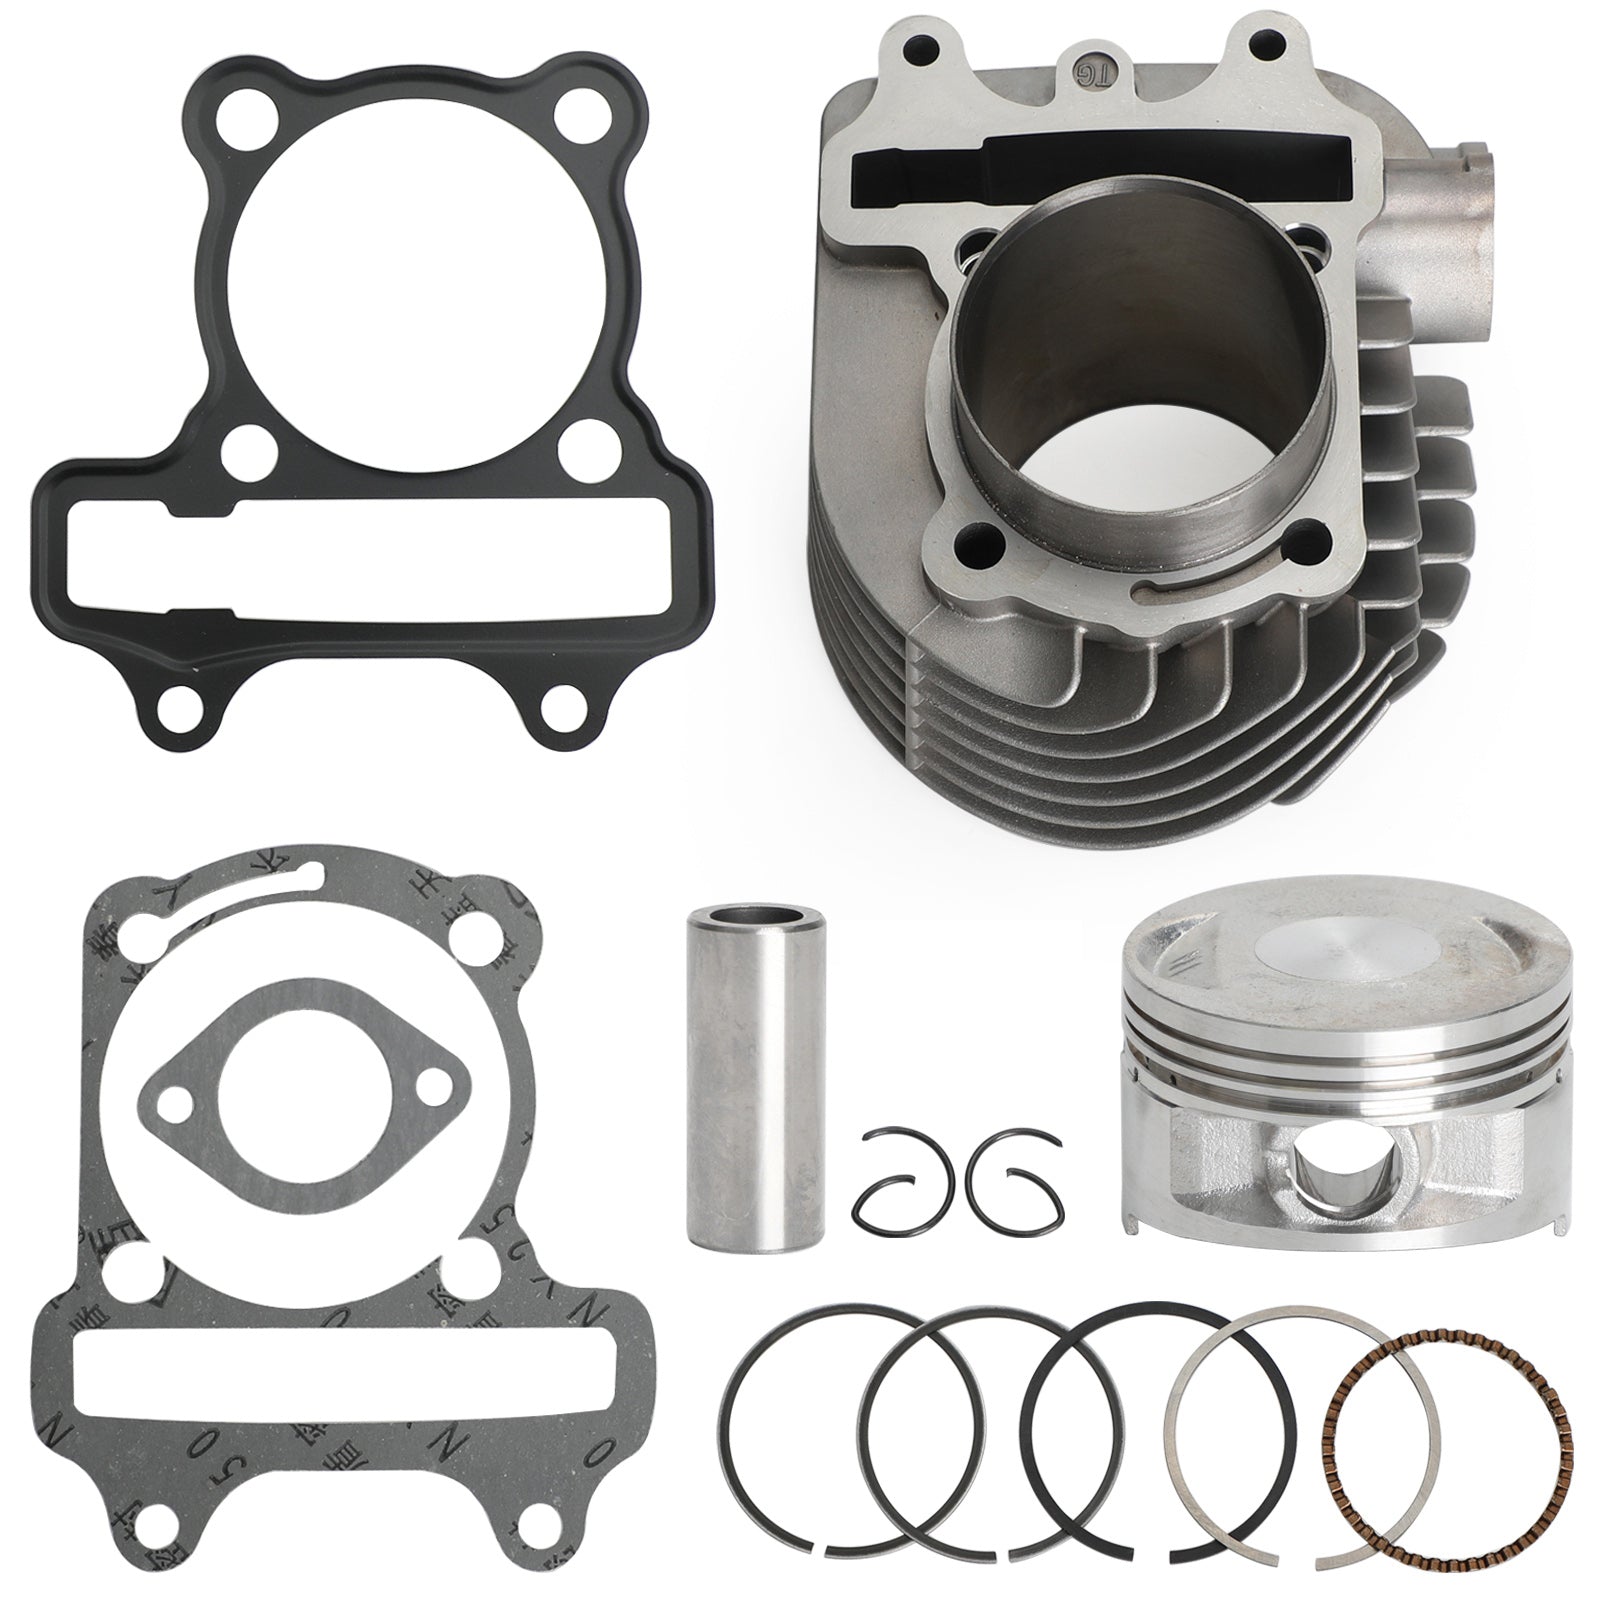 172cc CYLINDER UPGRADE KIT (61mm BORE) PISTON GASKET FOR GY6 125cc 150cc MOTORS Generic